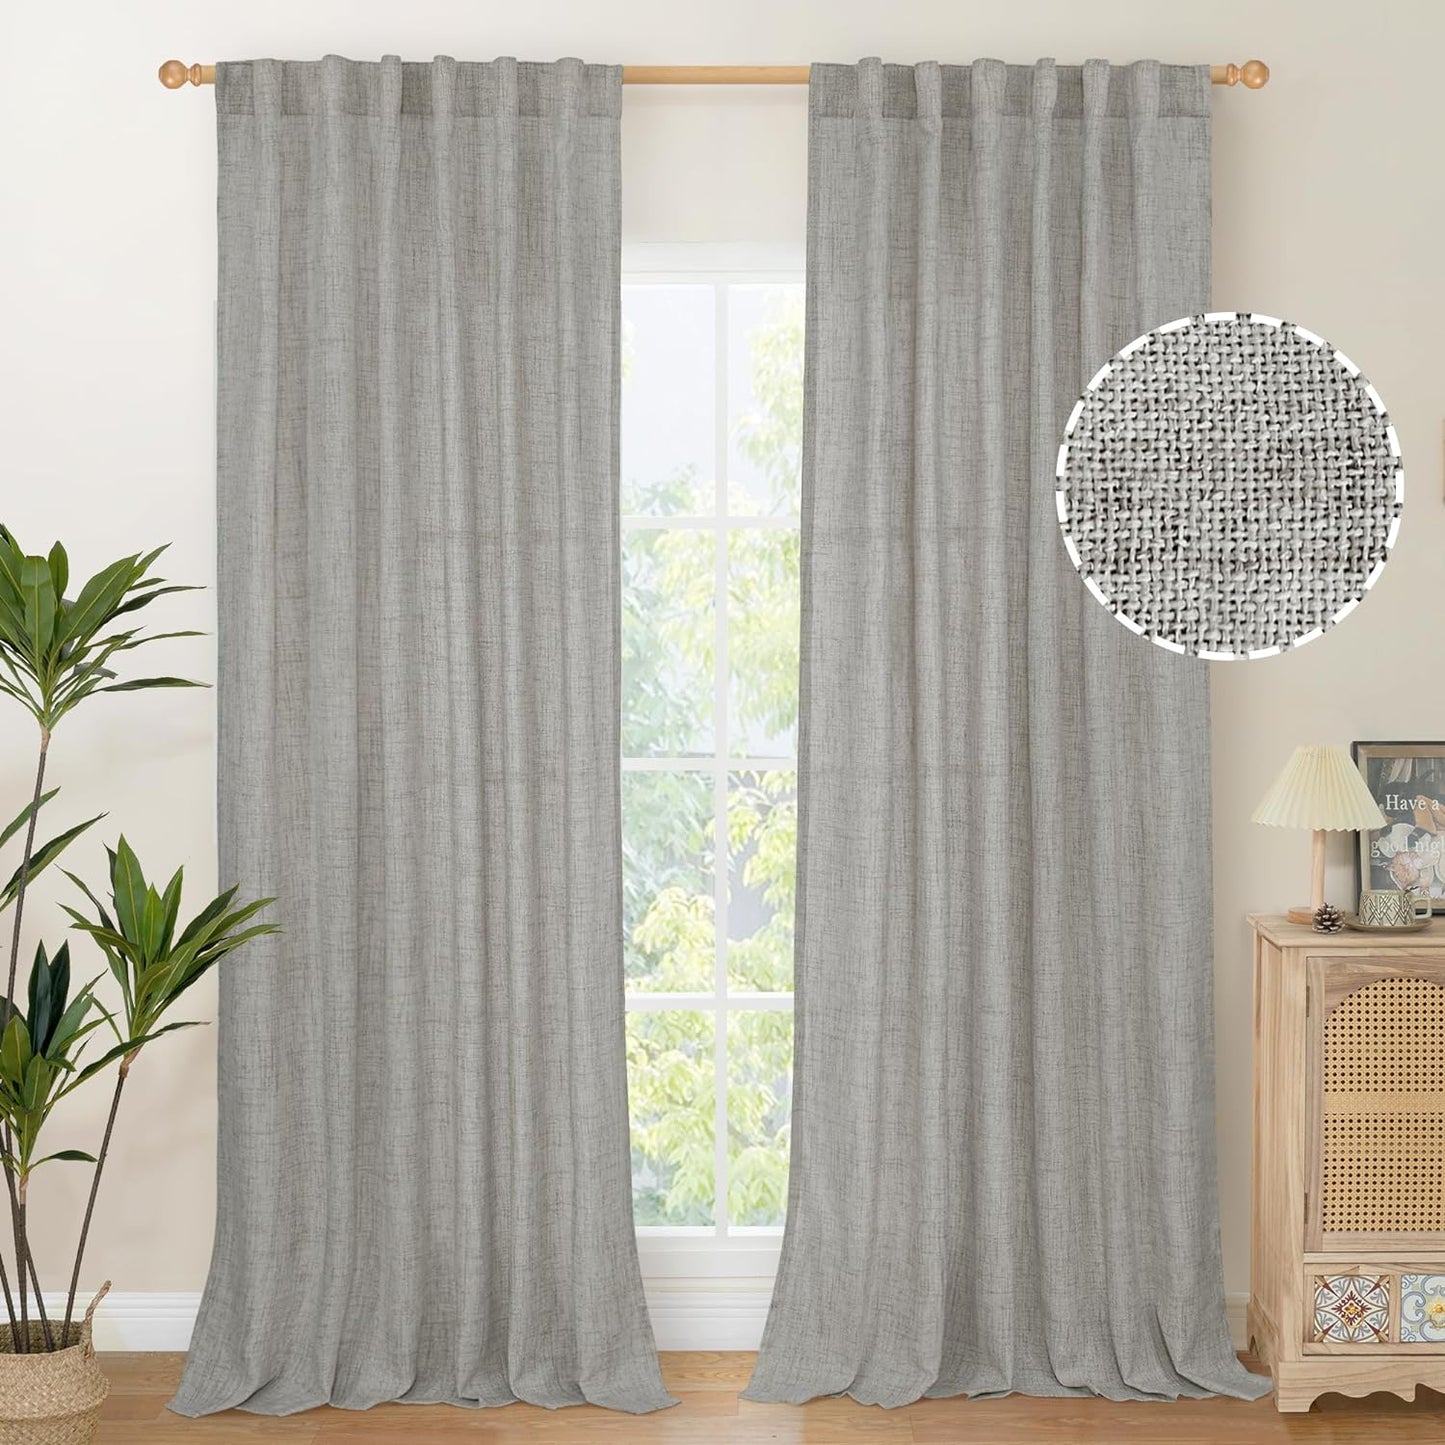 Youngstex Natural Linen Curtains 72 Inch Length 2 Panels for Living Room Light Filtering Textured Window Drapes for Bedroom Dining Office Back Tab Rod Pocket, 52 X 72 Inch  YoungsTex Dark Grey 52W X 95L 